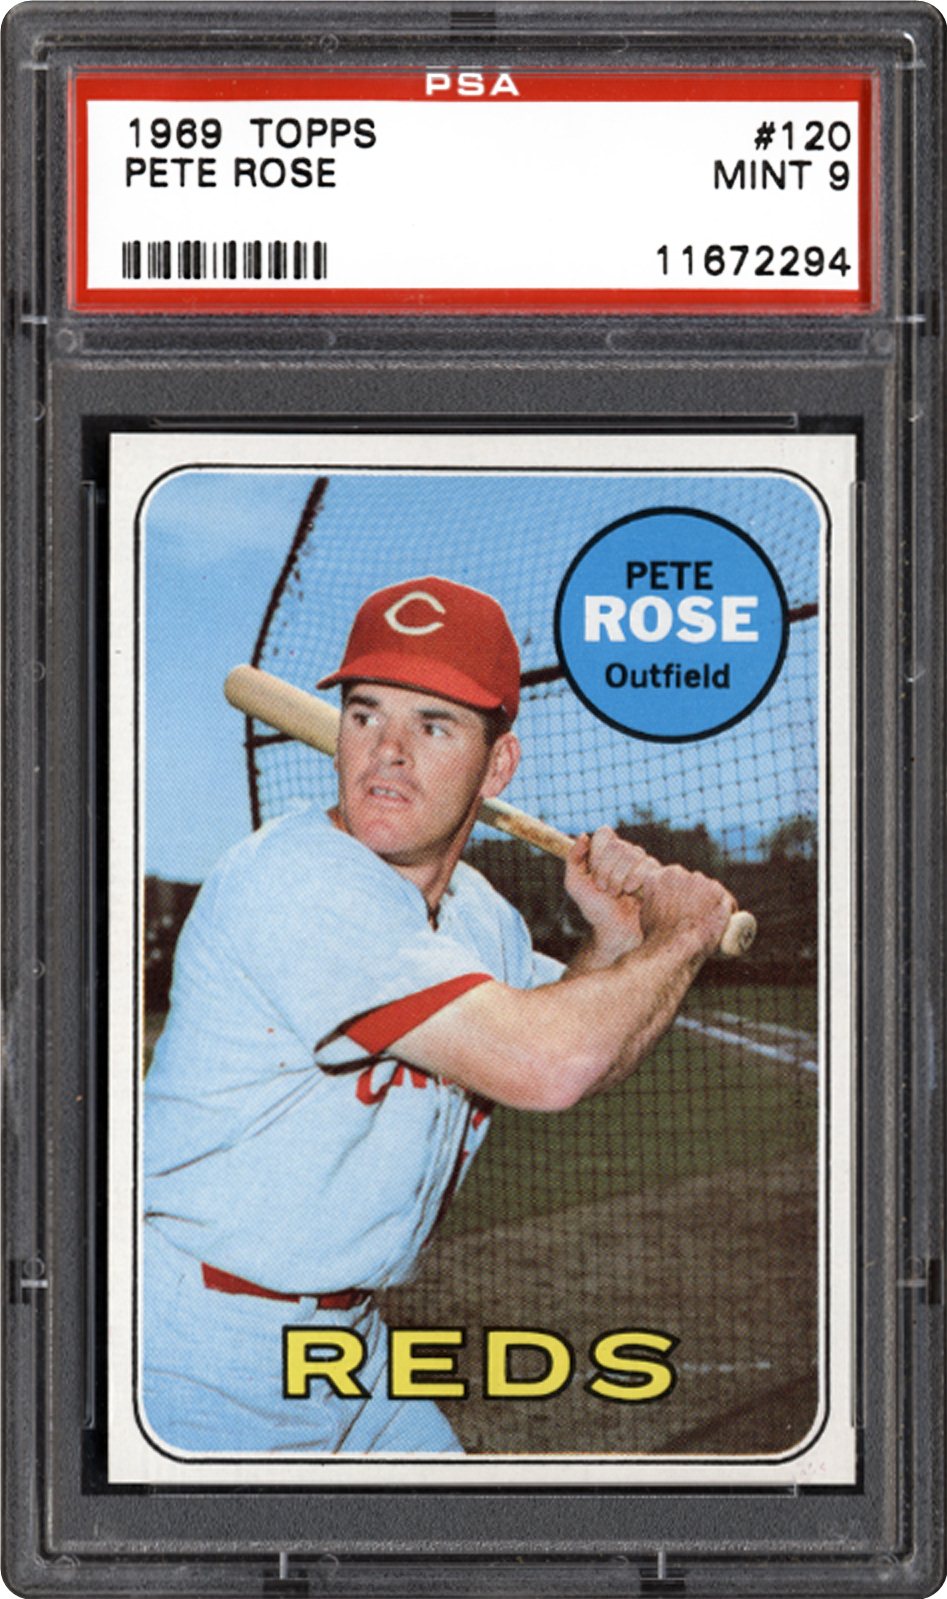 1969 Topps Pete Rose PSA CardFacts™